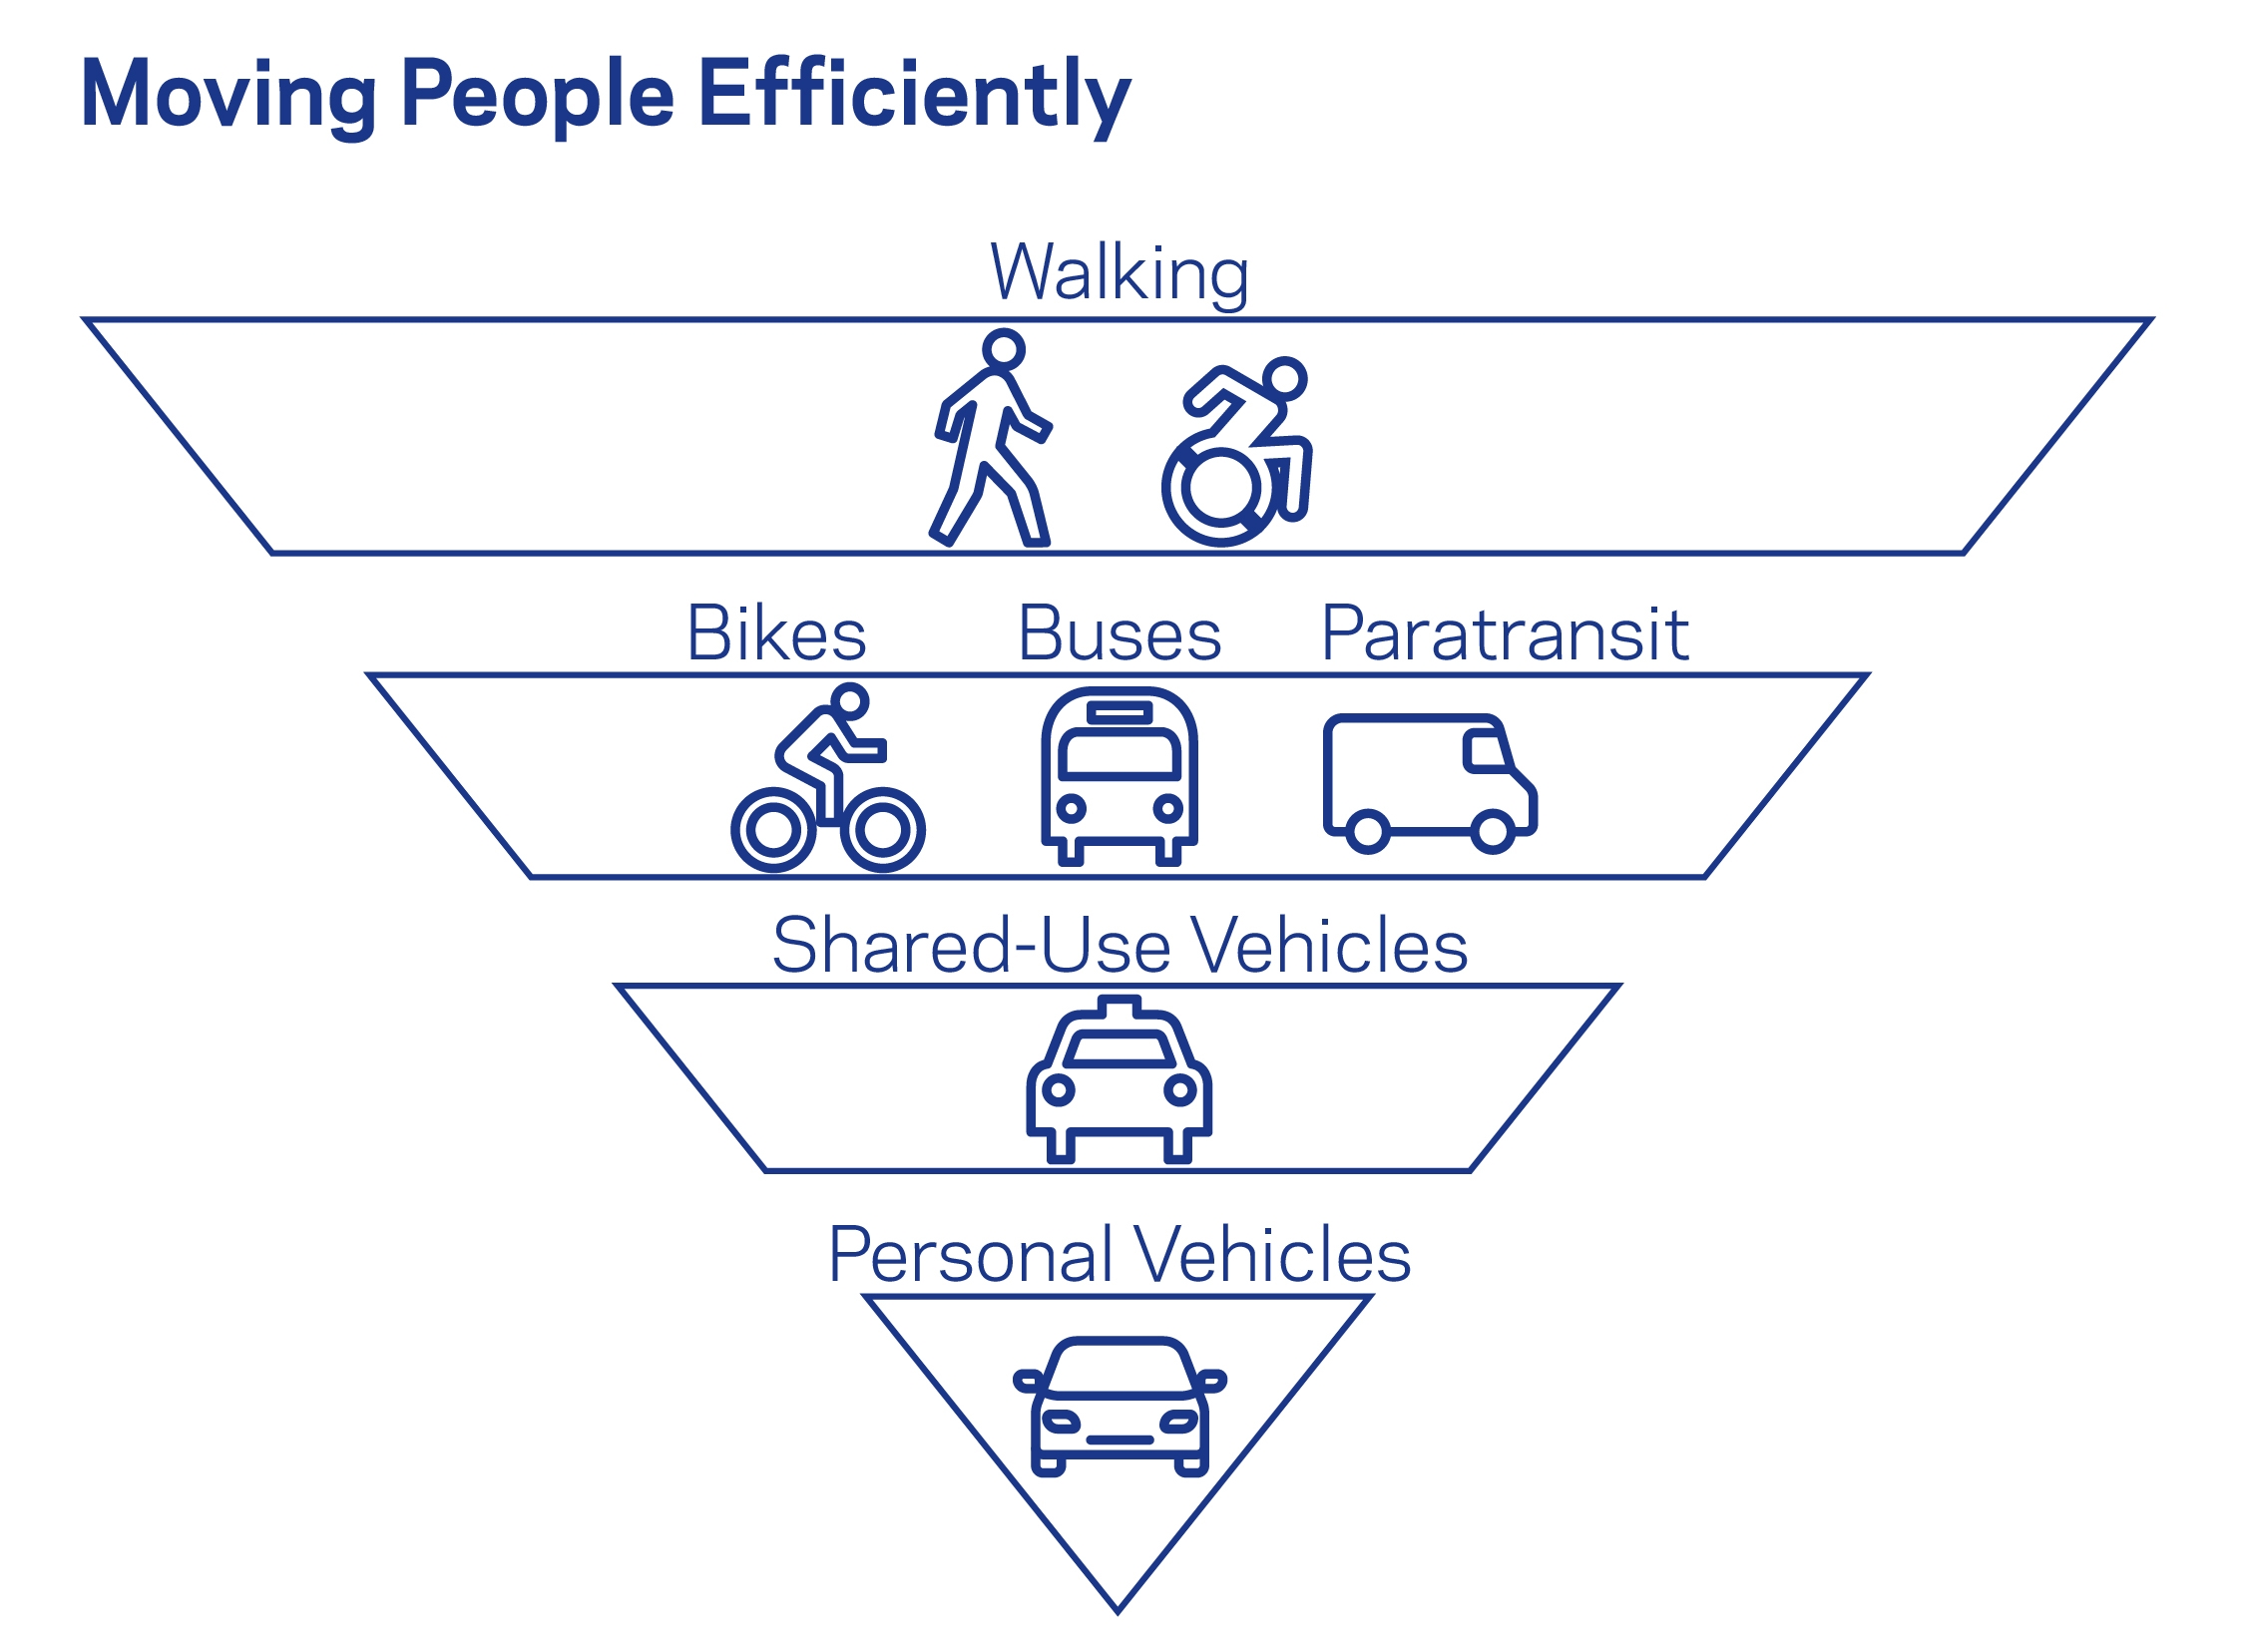 Moving people efficiently diagram